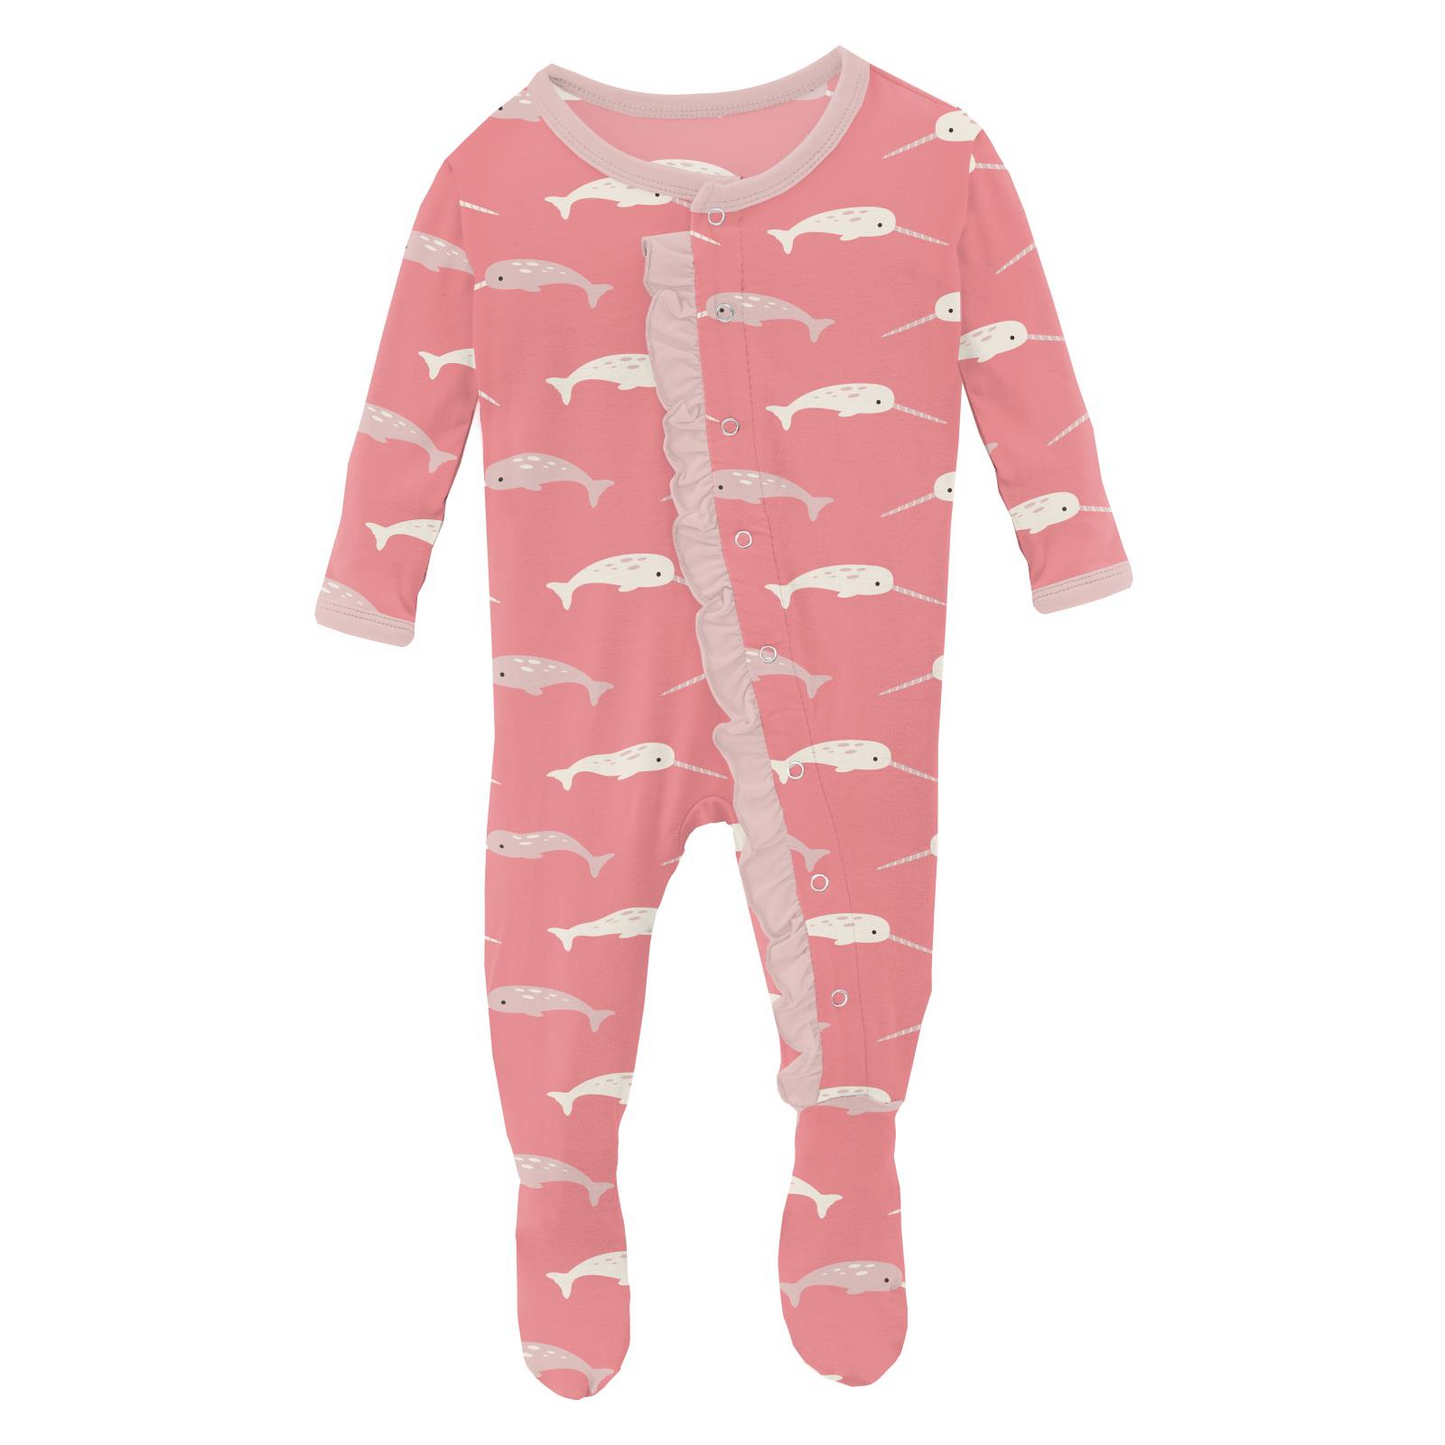 Kickee Pants Print Classic Ruffle Footie with Snaps: Strawberry Narwhal